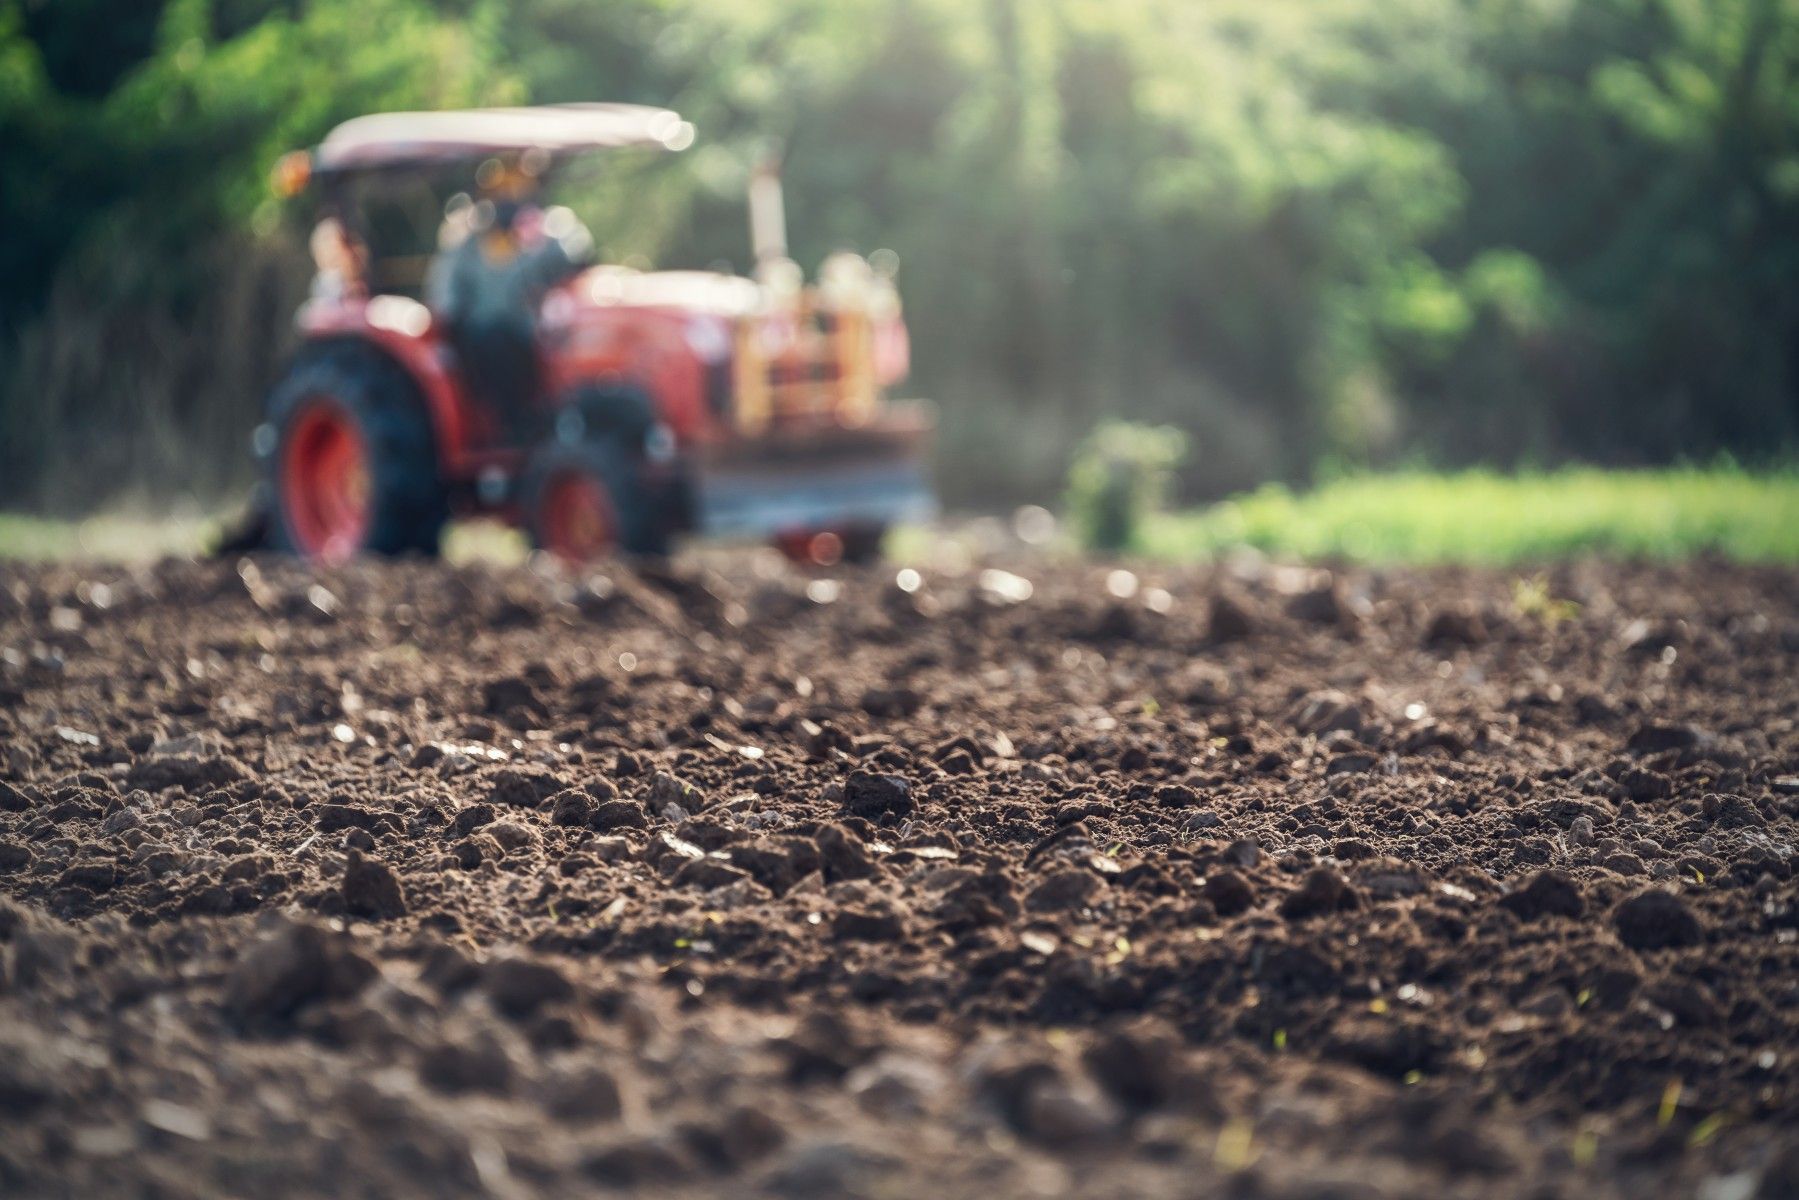 A field of soil with a tractor.